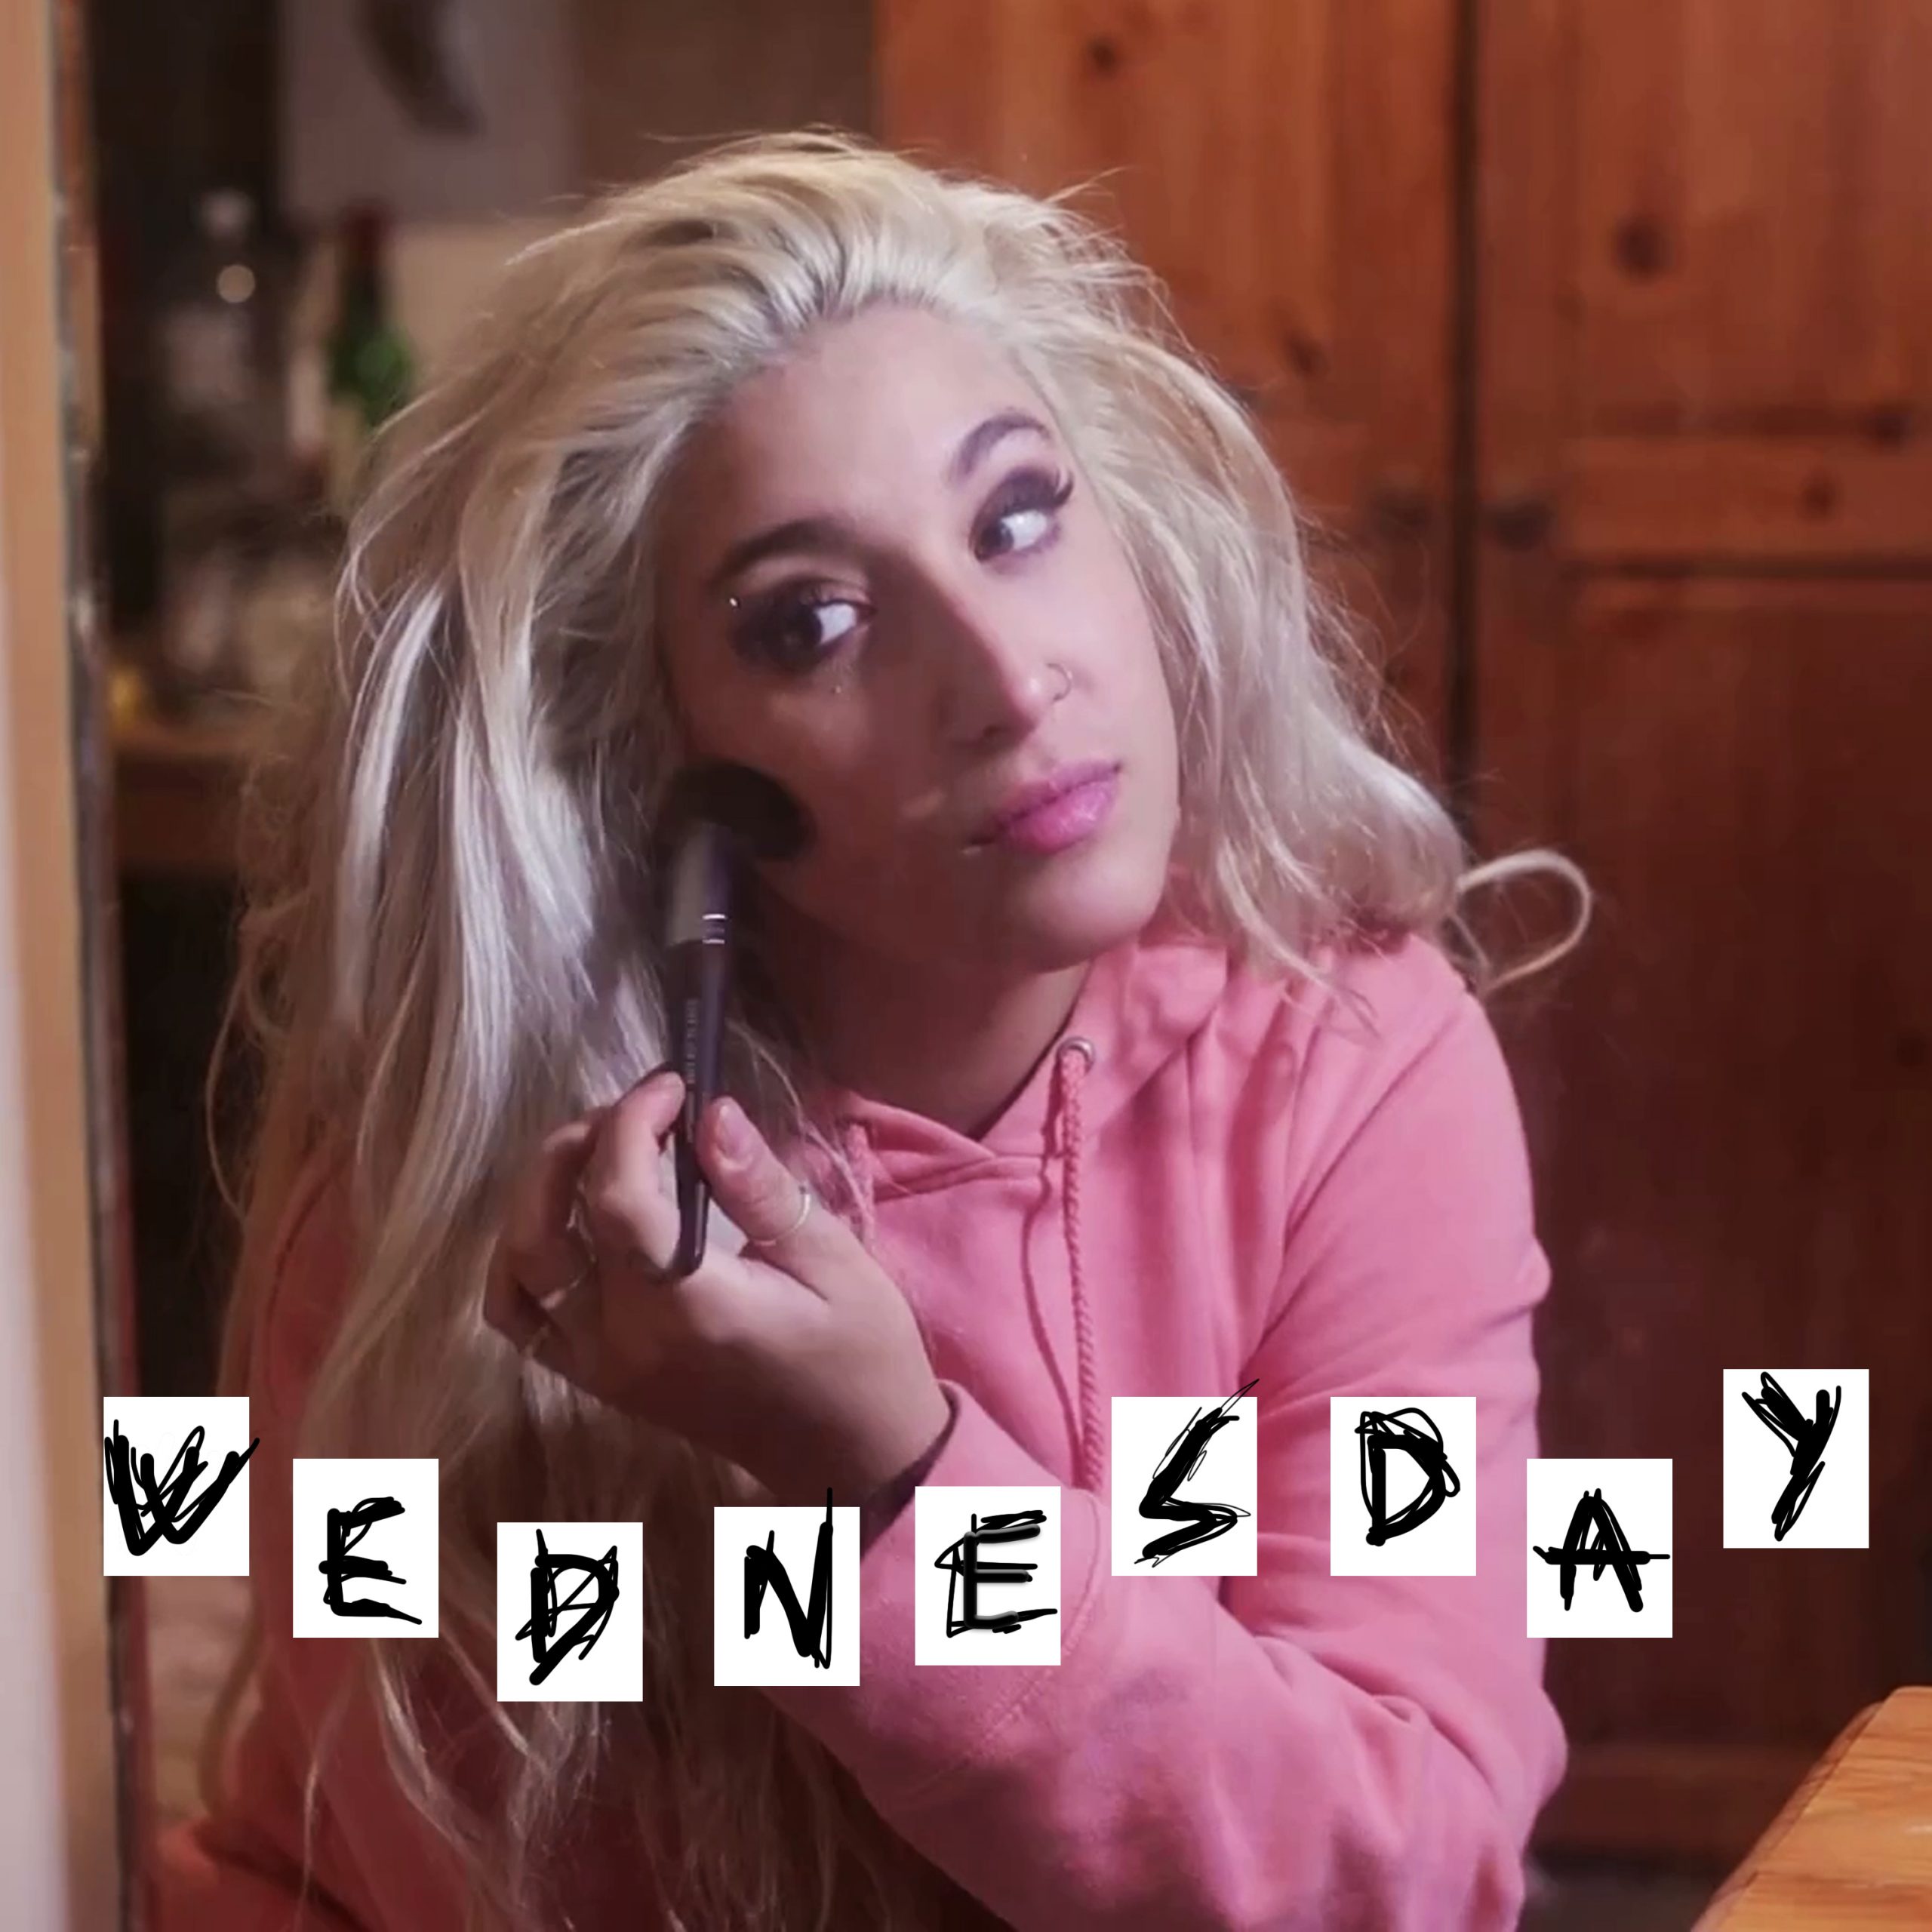 London based singer-songwriter ‘Sara Barta’ delivers a twist of brightness and dance-ready performative fun on new single ‘Wednesday’.